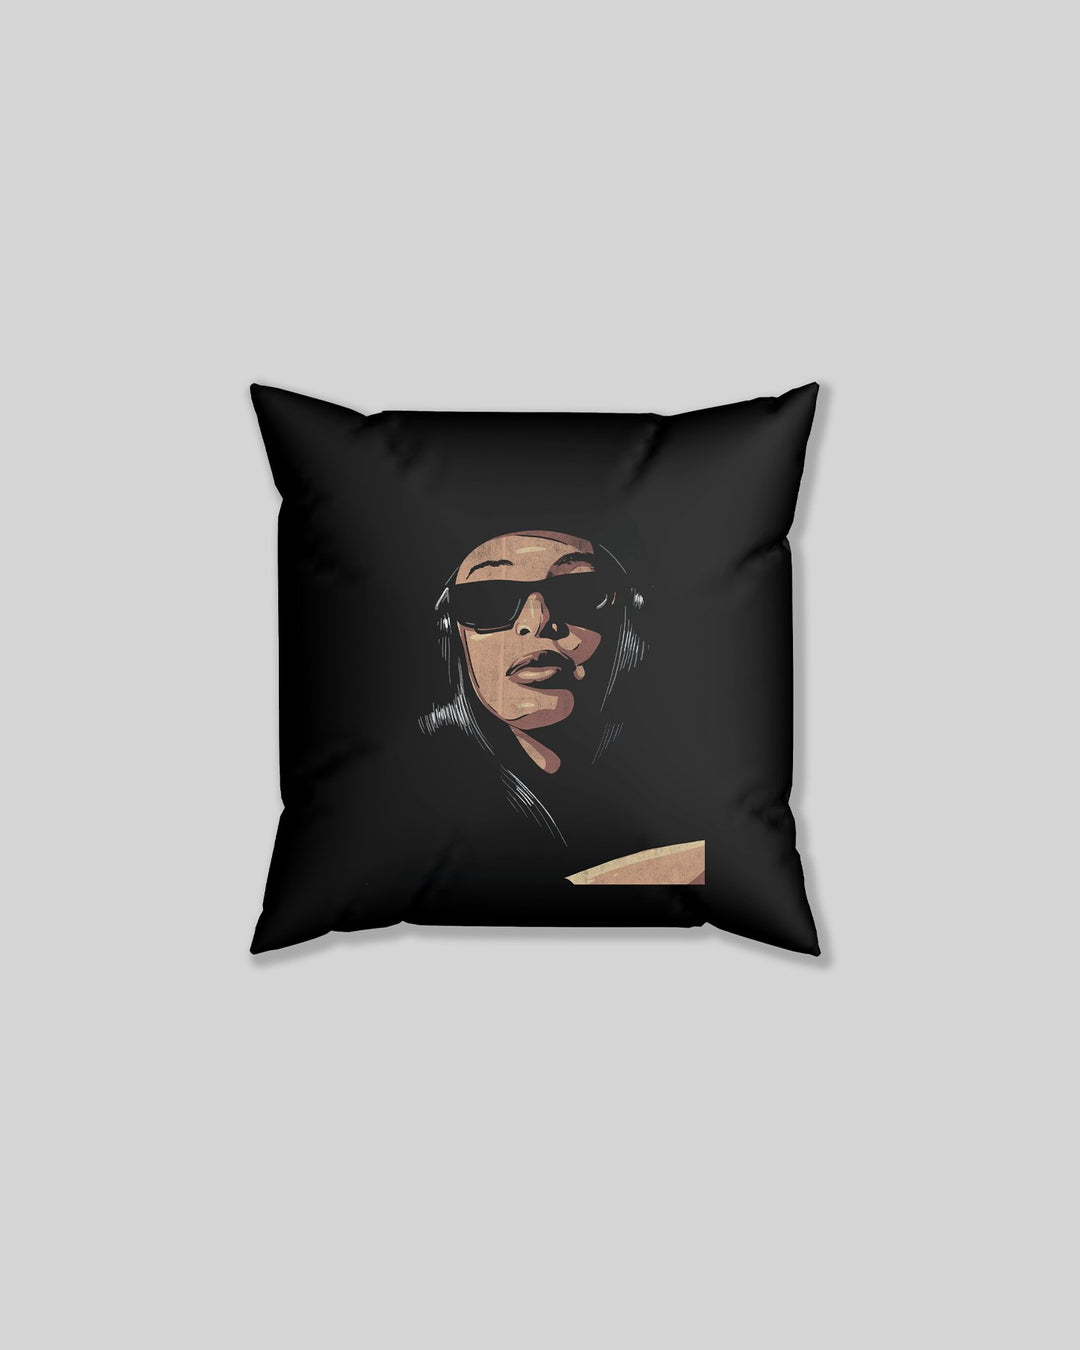 Aaliyah Black Pillow - trainofthoughtcollective